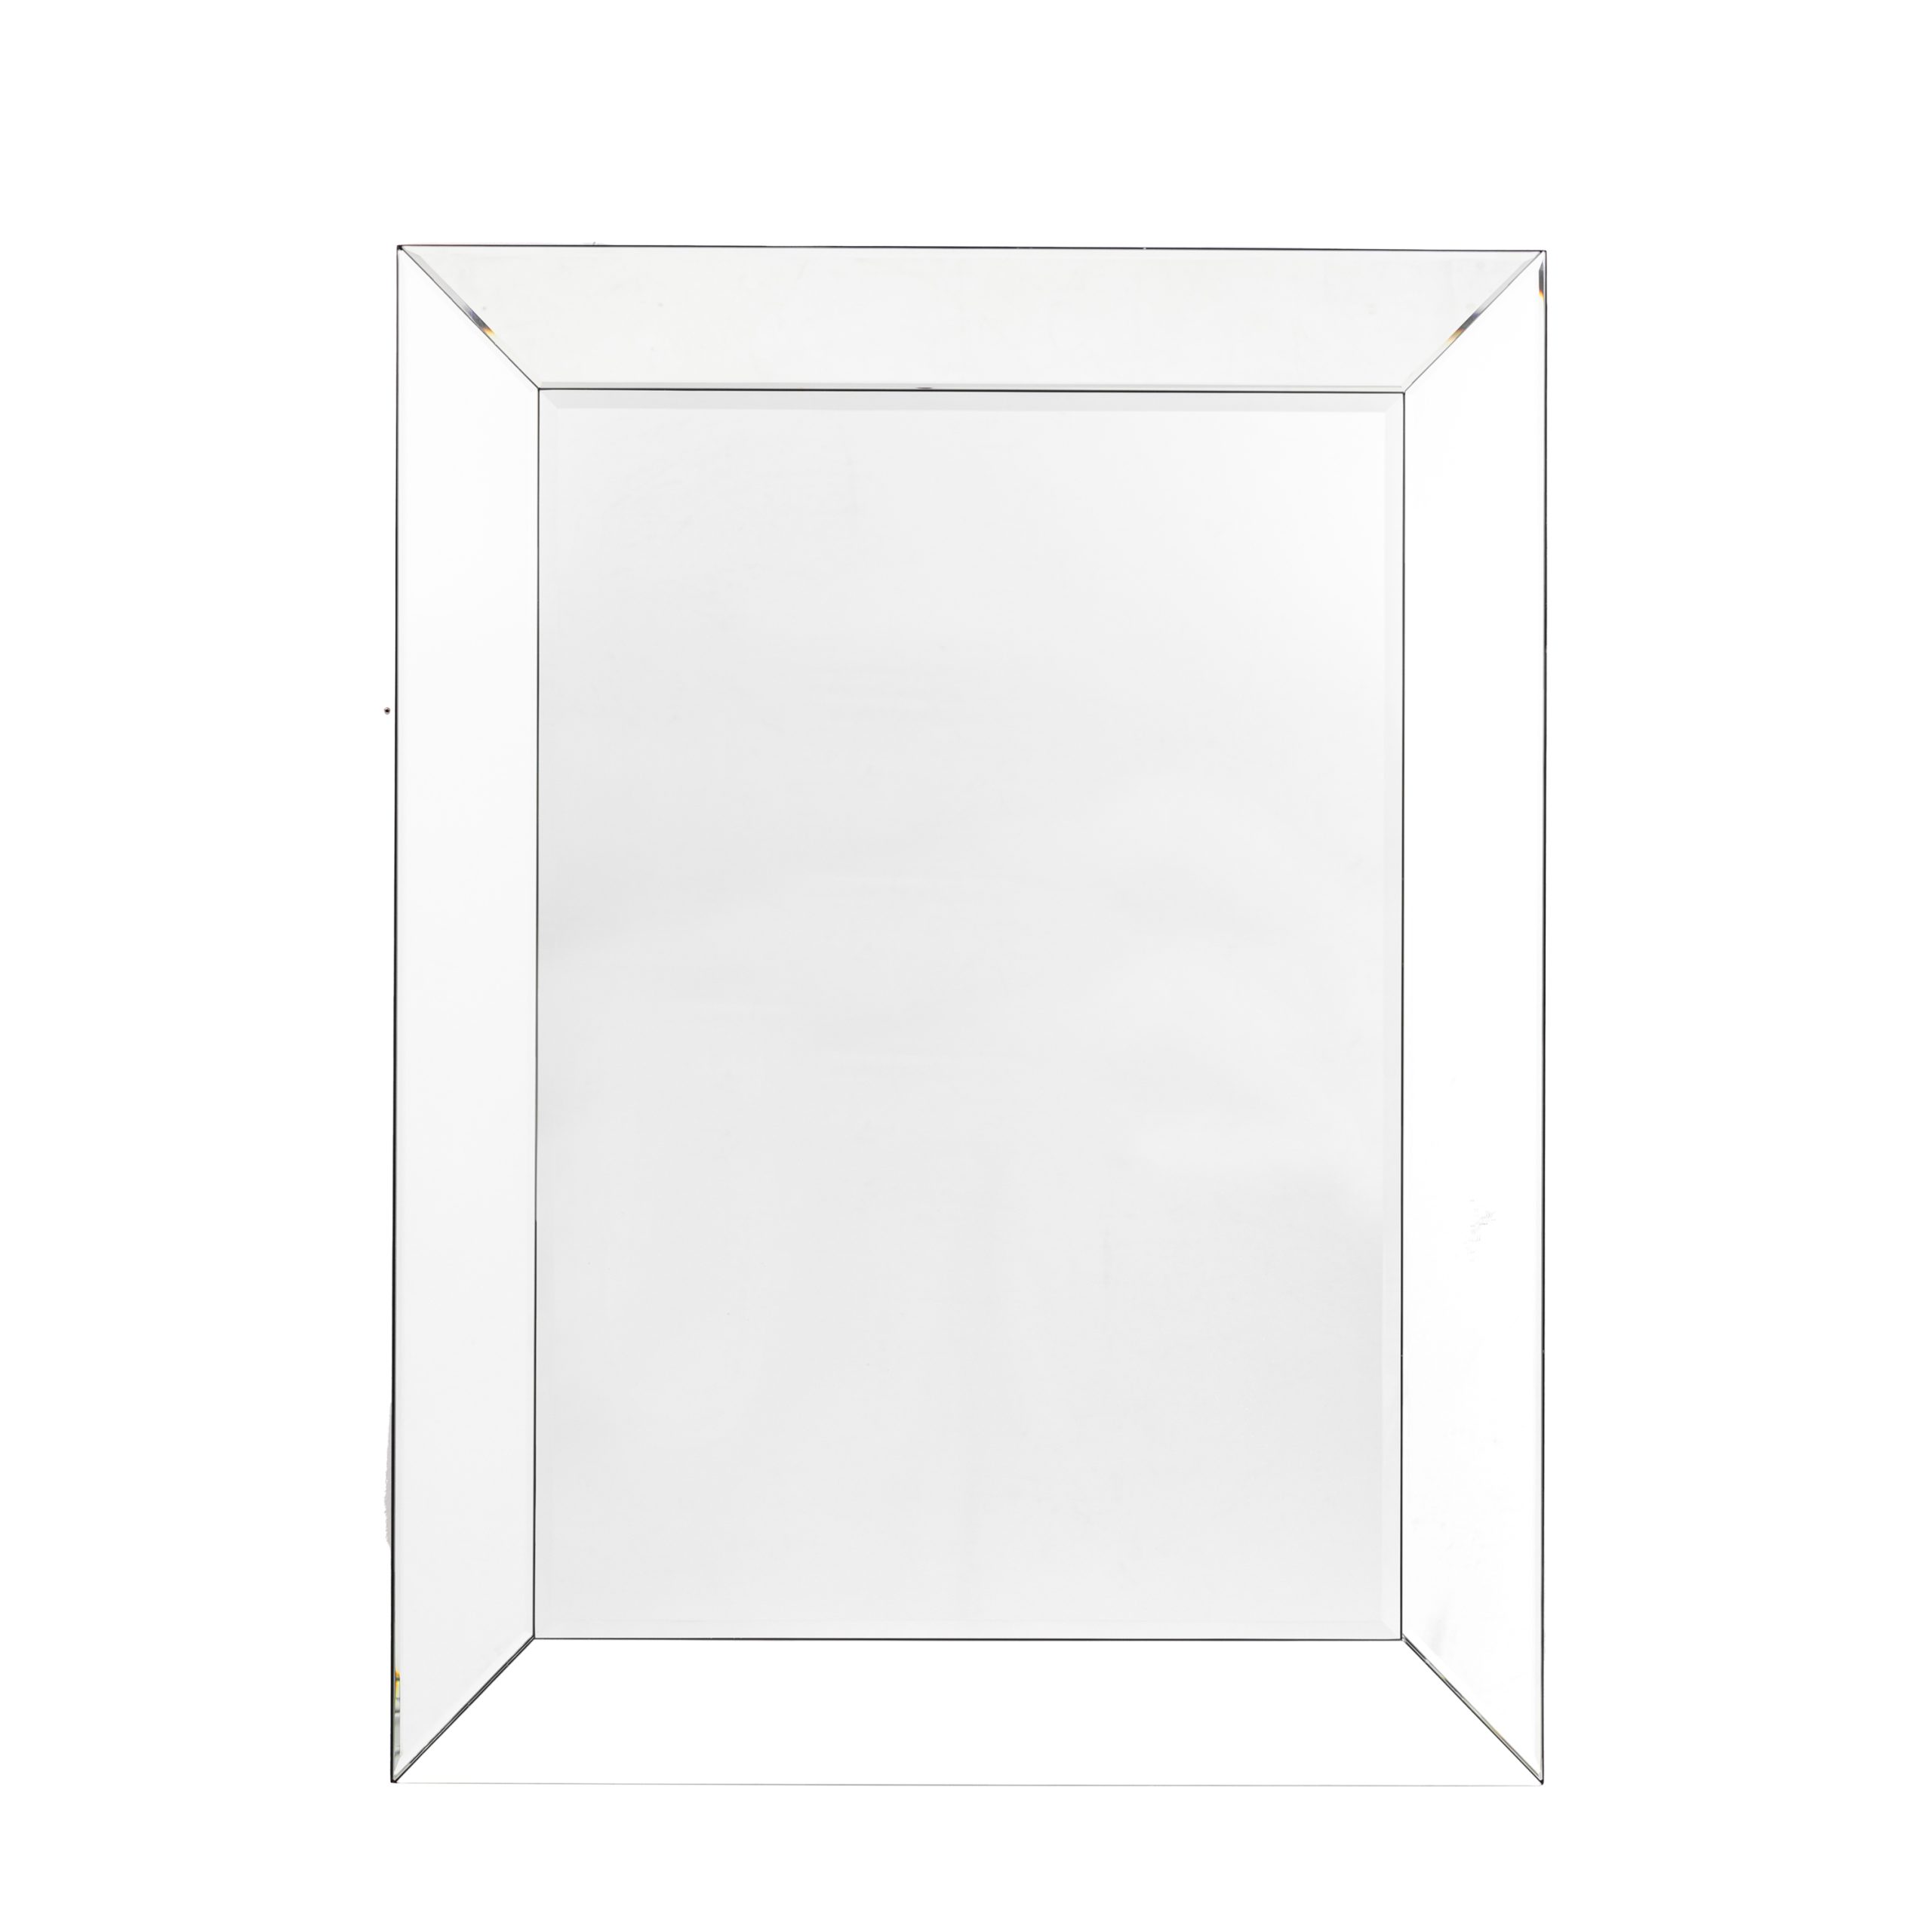 Gallery Direct Greenhithe Rectangle Mirror